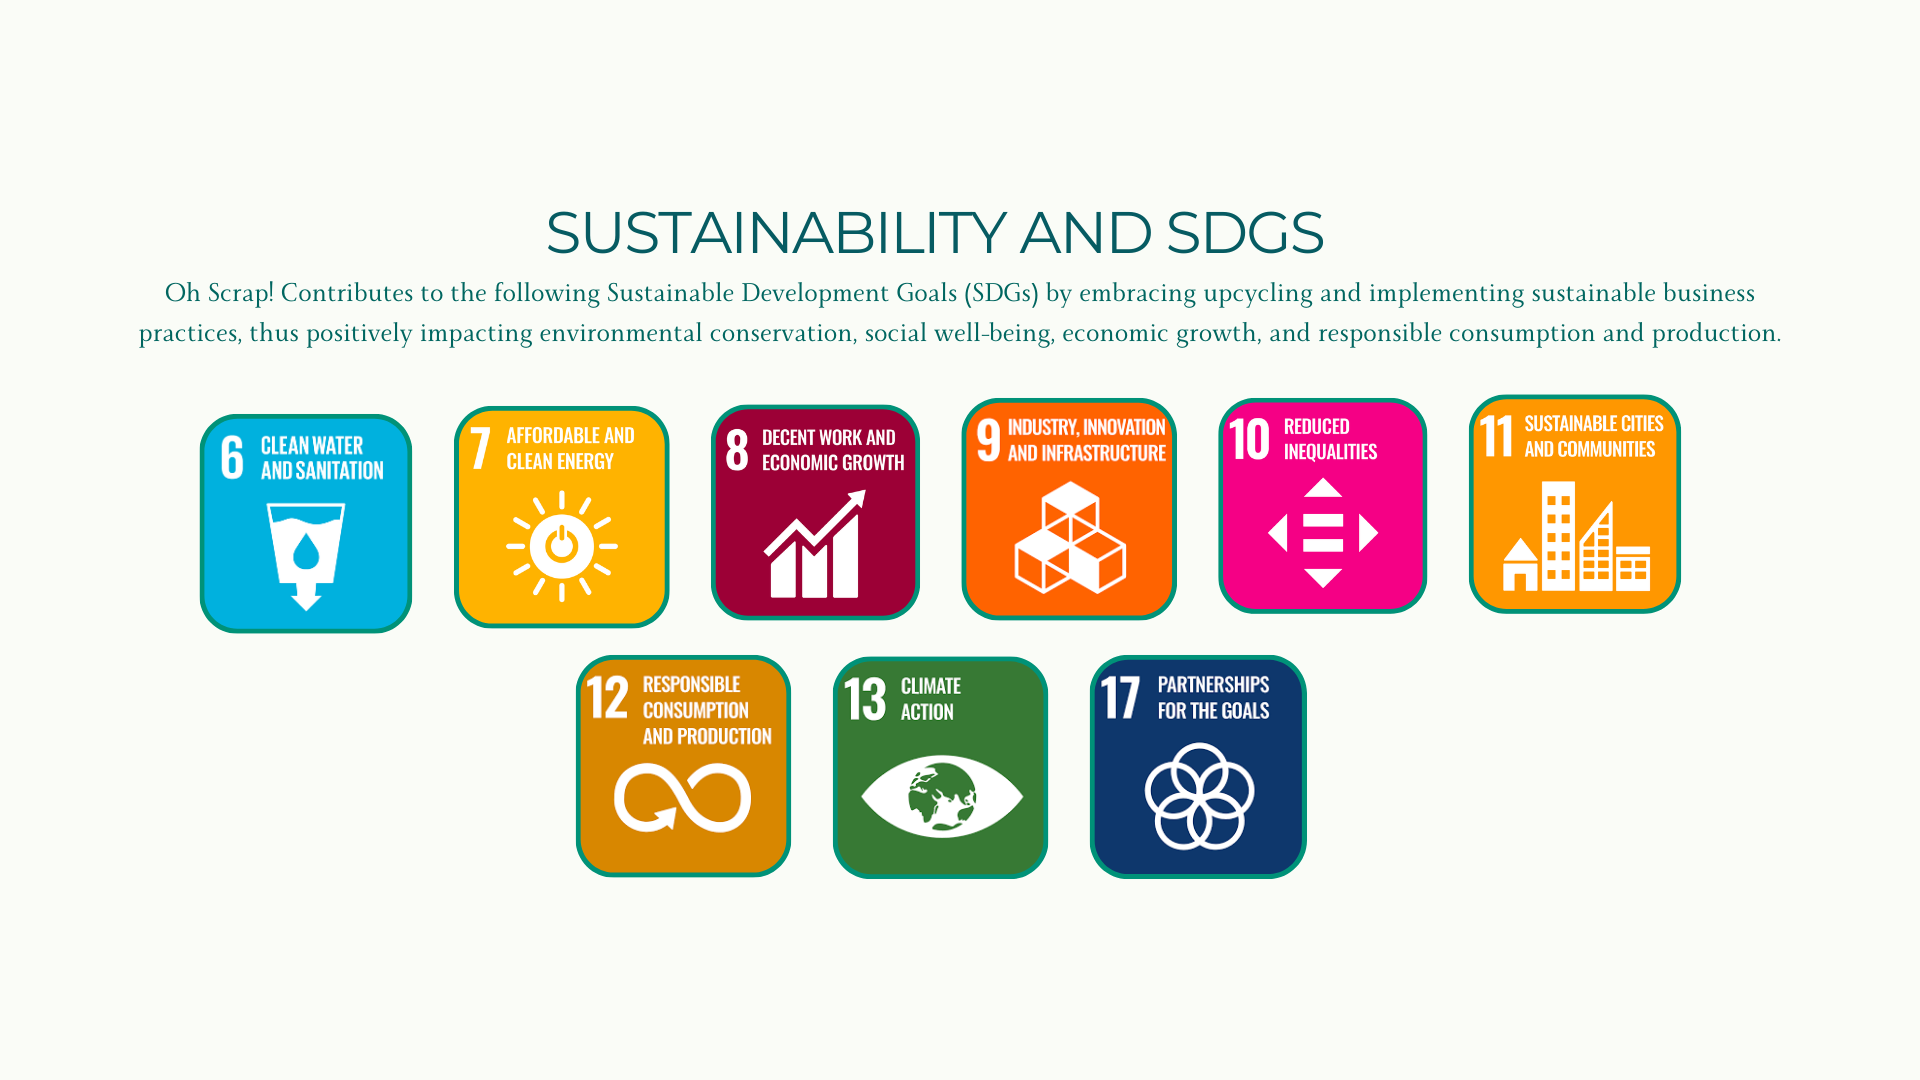 Our commitment through upholding the sustainabilty development goals of 2023